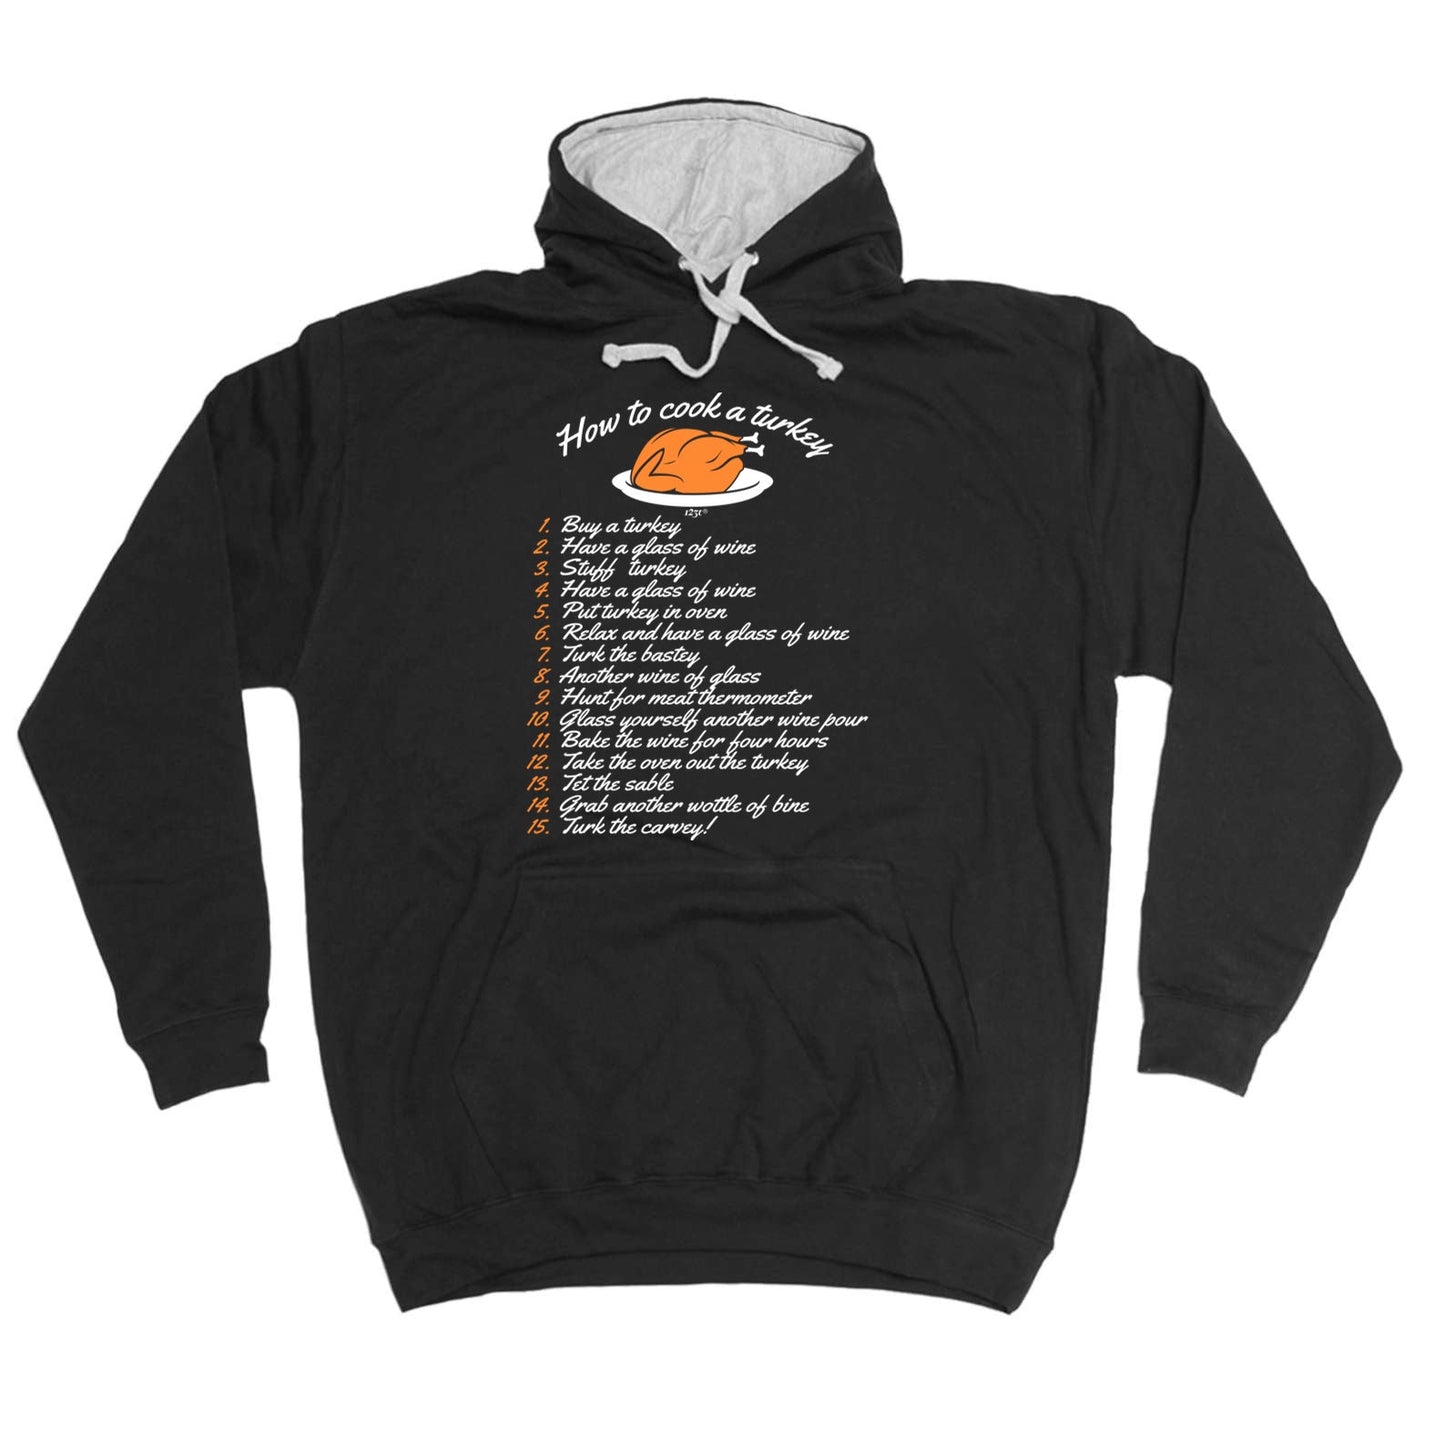 How To Cook A Turkey Christmas - Xmas Novelty Hoodies Hoodie